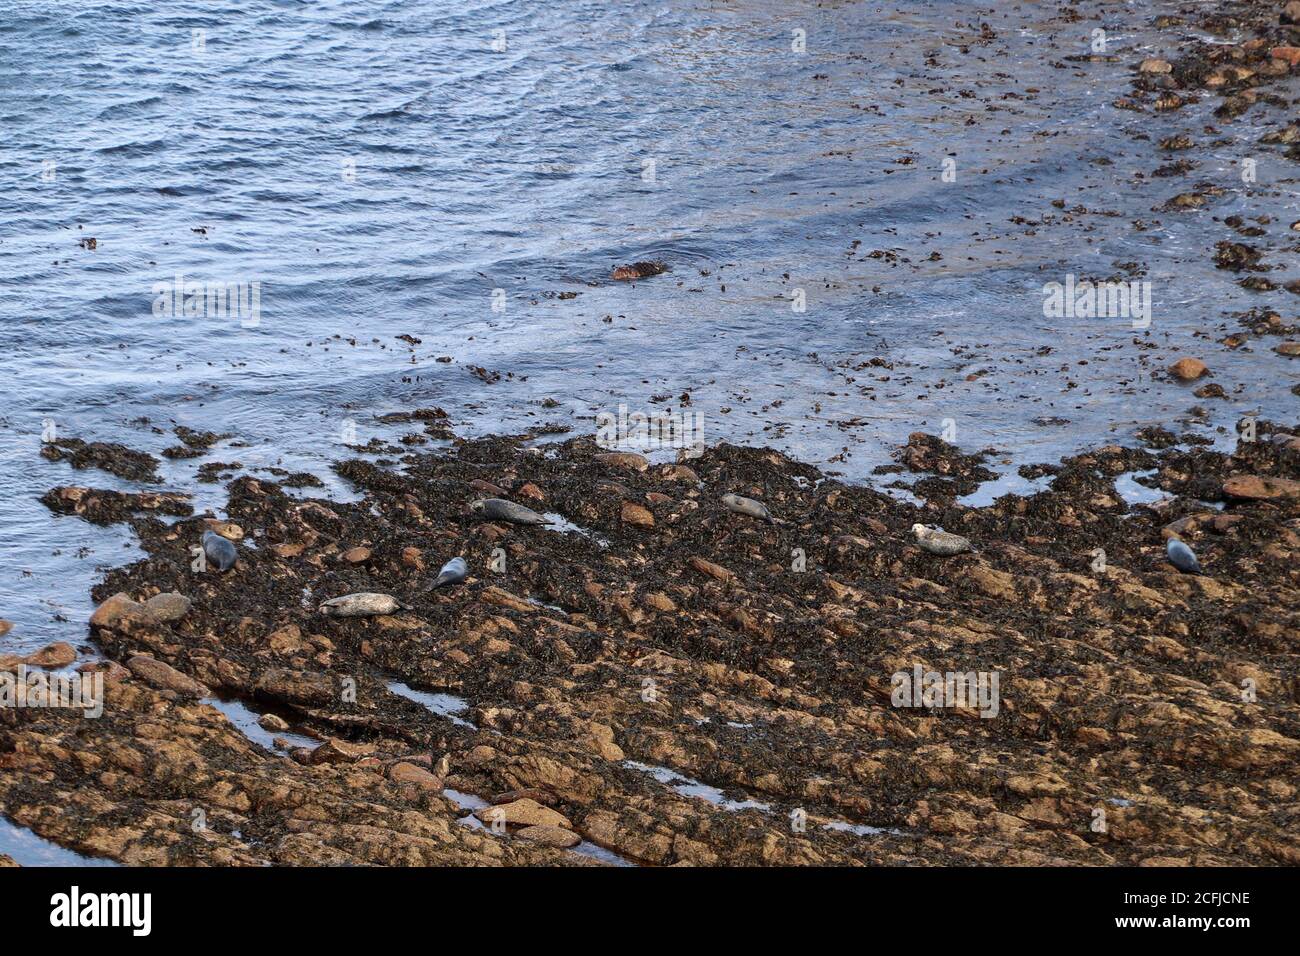 Camouflaged common seals hauled out on rocks, Brough, North of Scotland Stock Photo